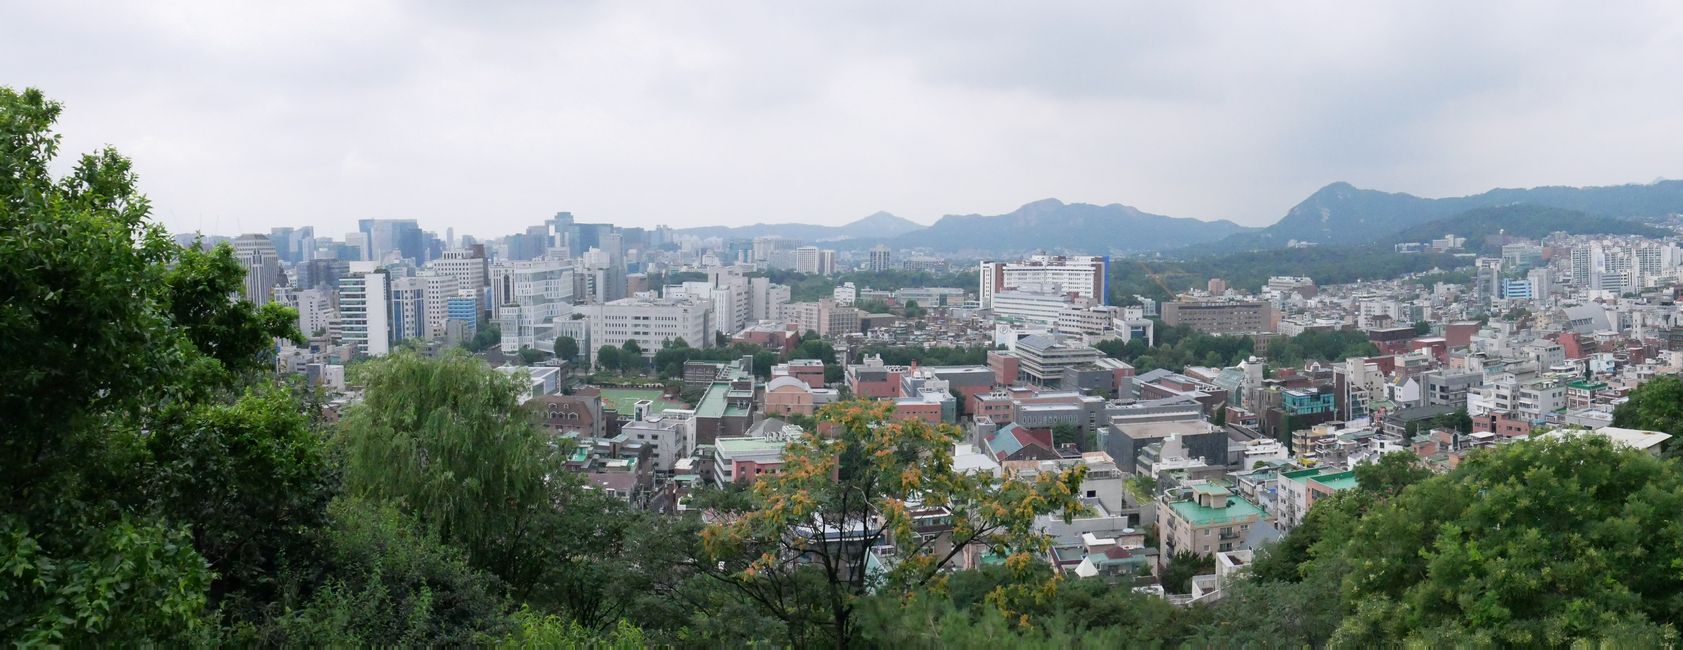 First impressions from Seoul